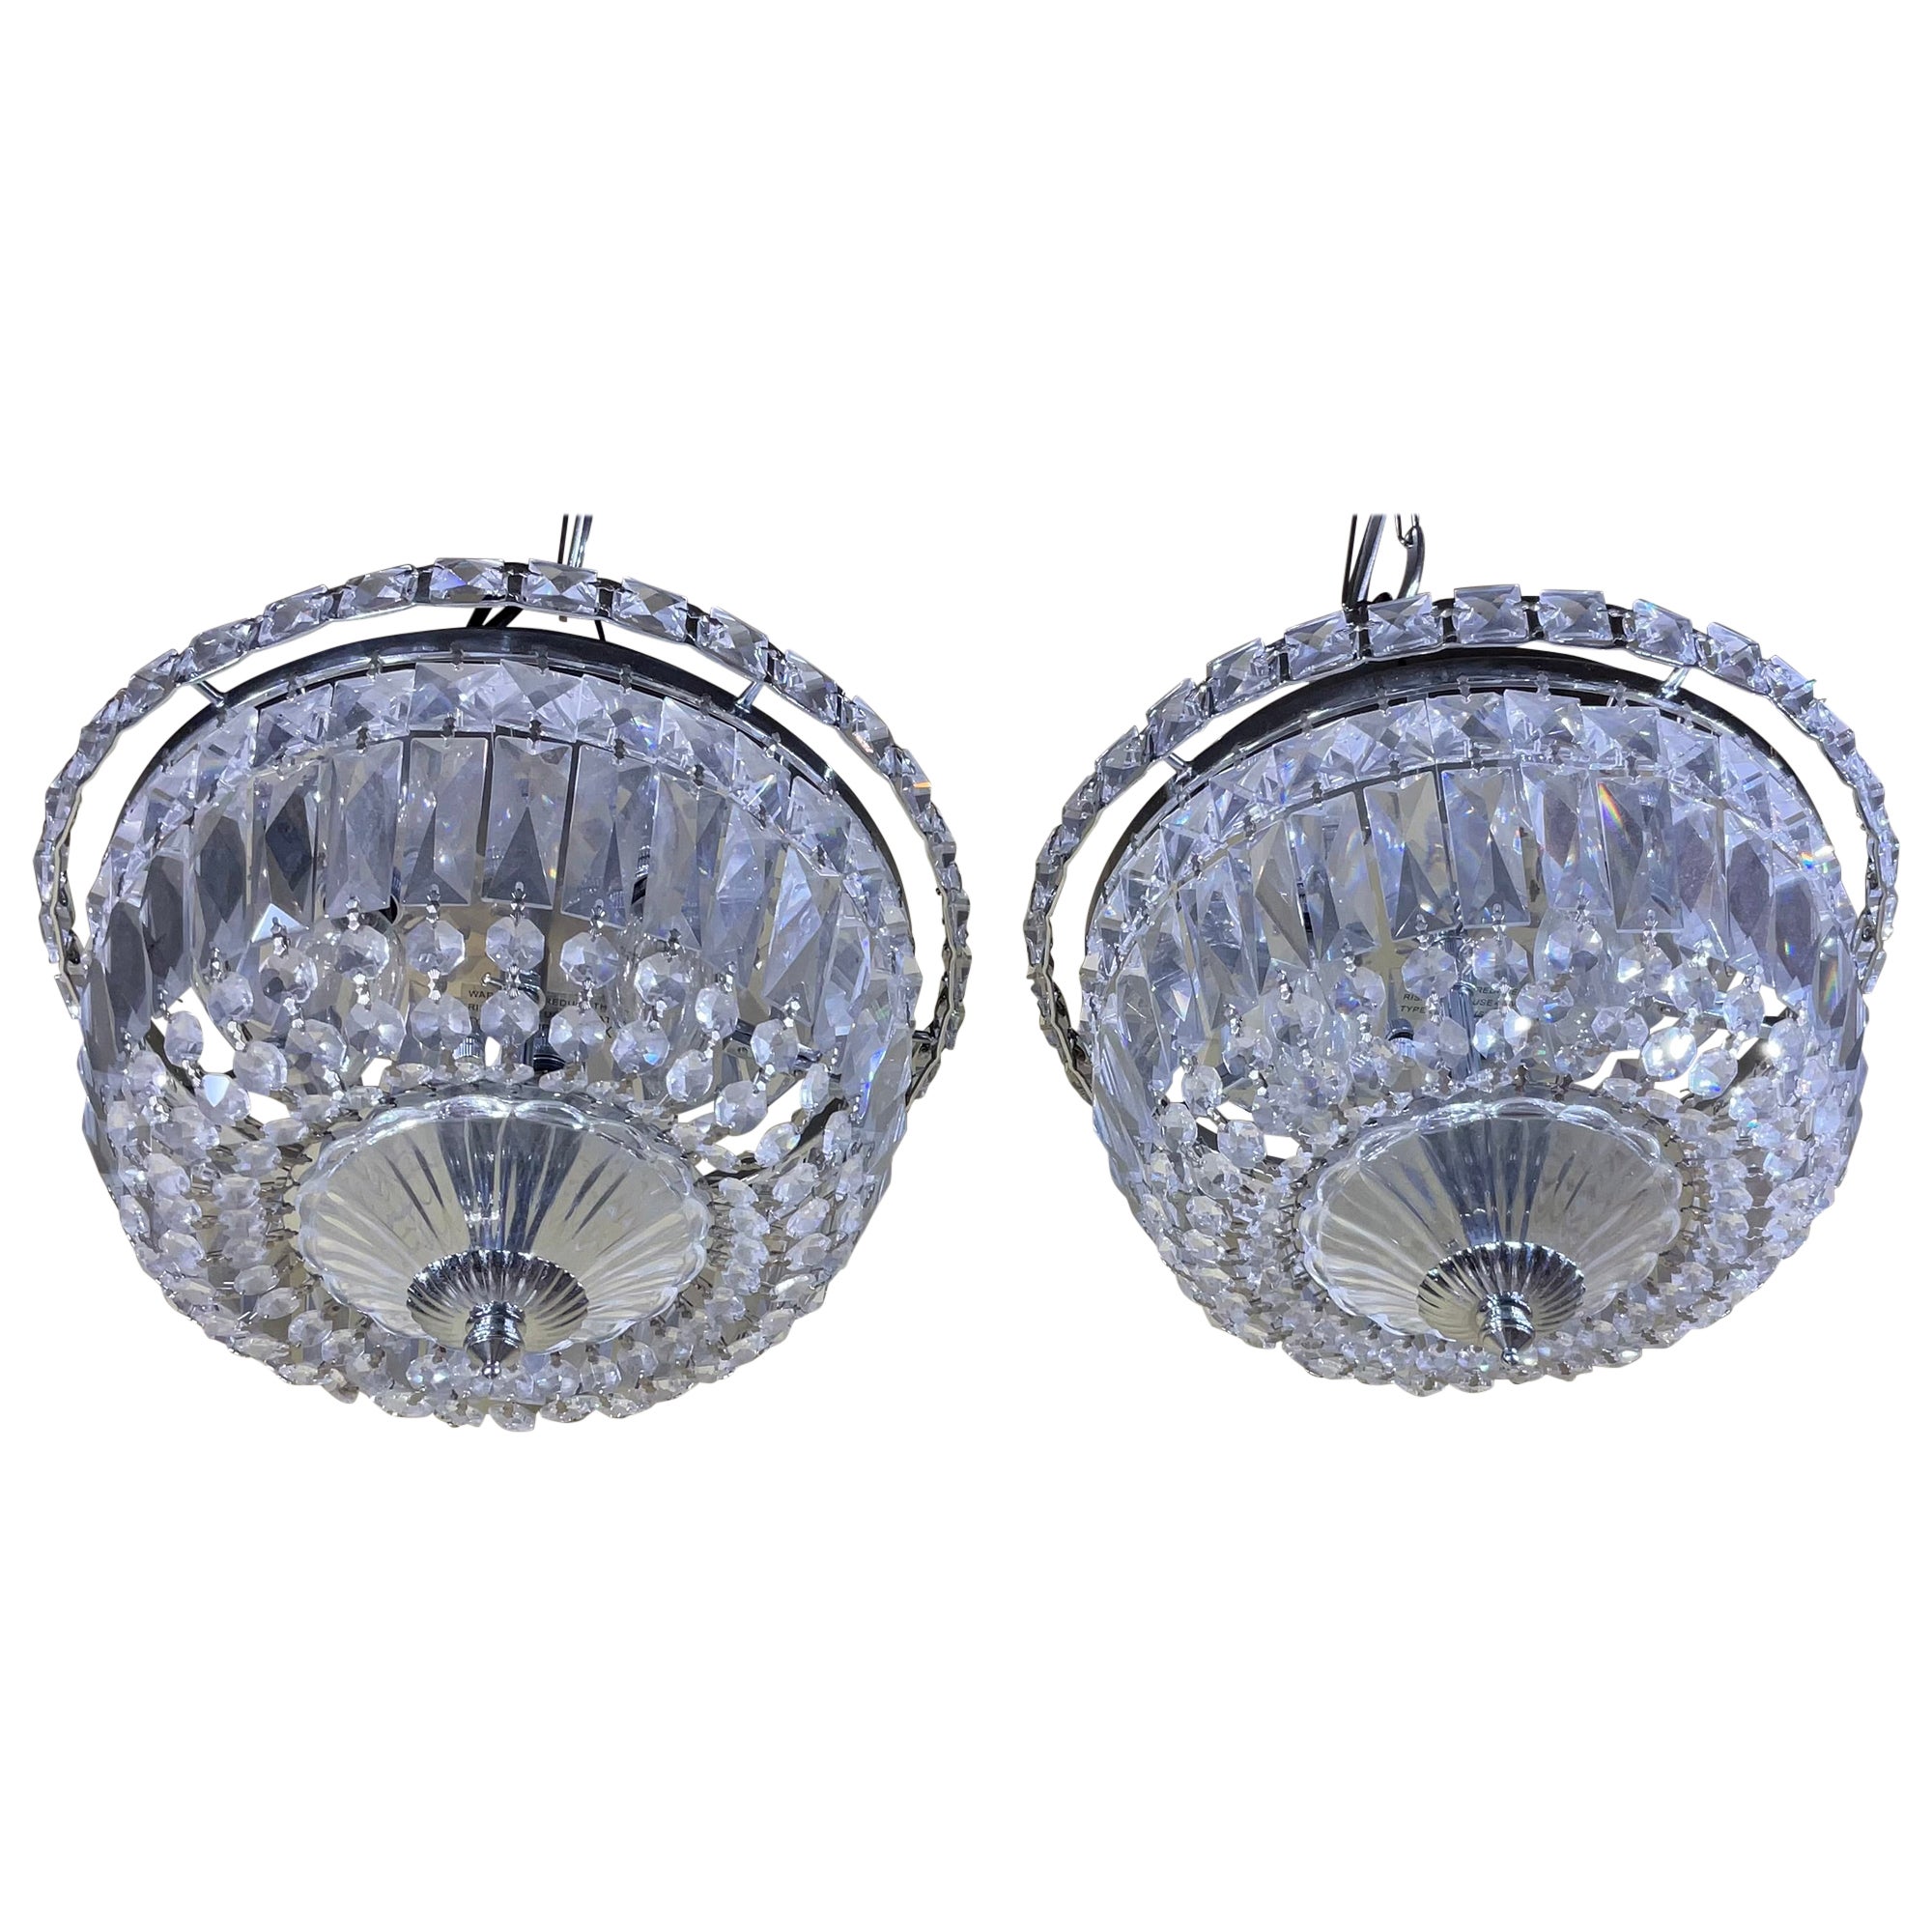 Pair Of 1940's Hollywood Style Crystal Drop-Down Flush Mount Chandelier For Sale